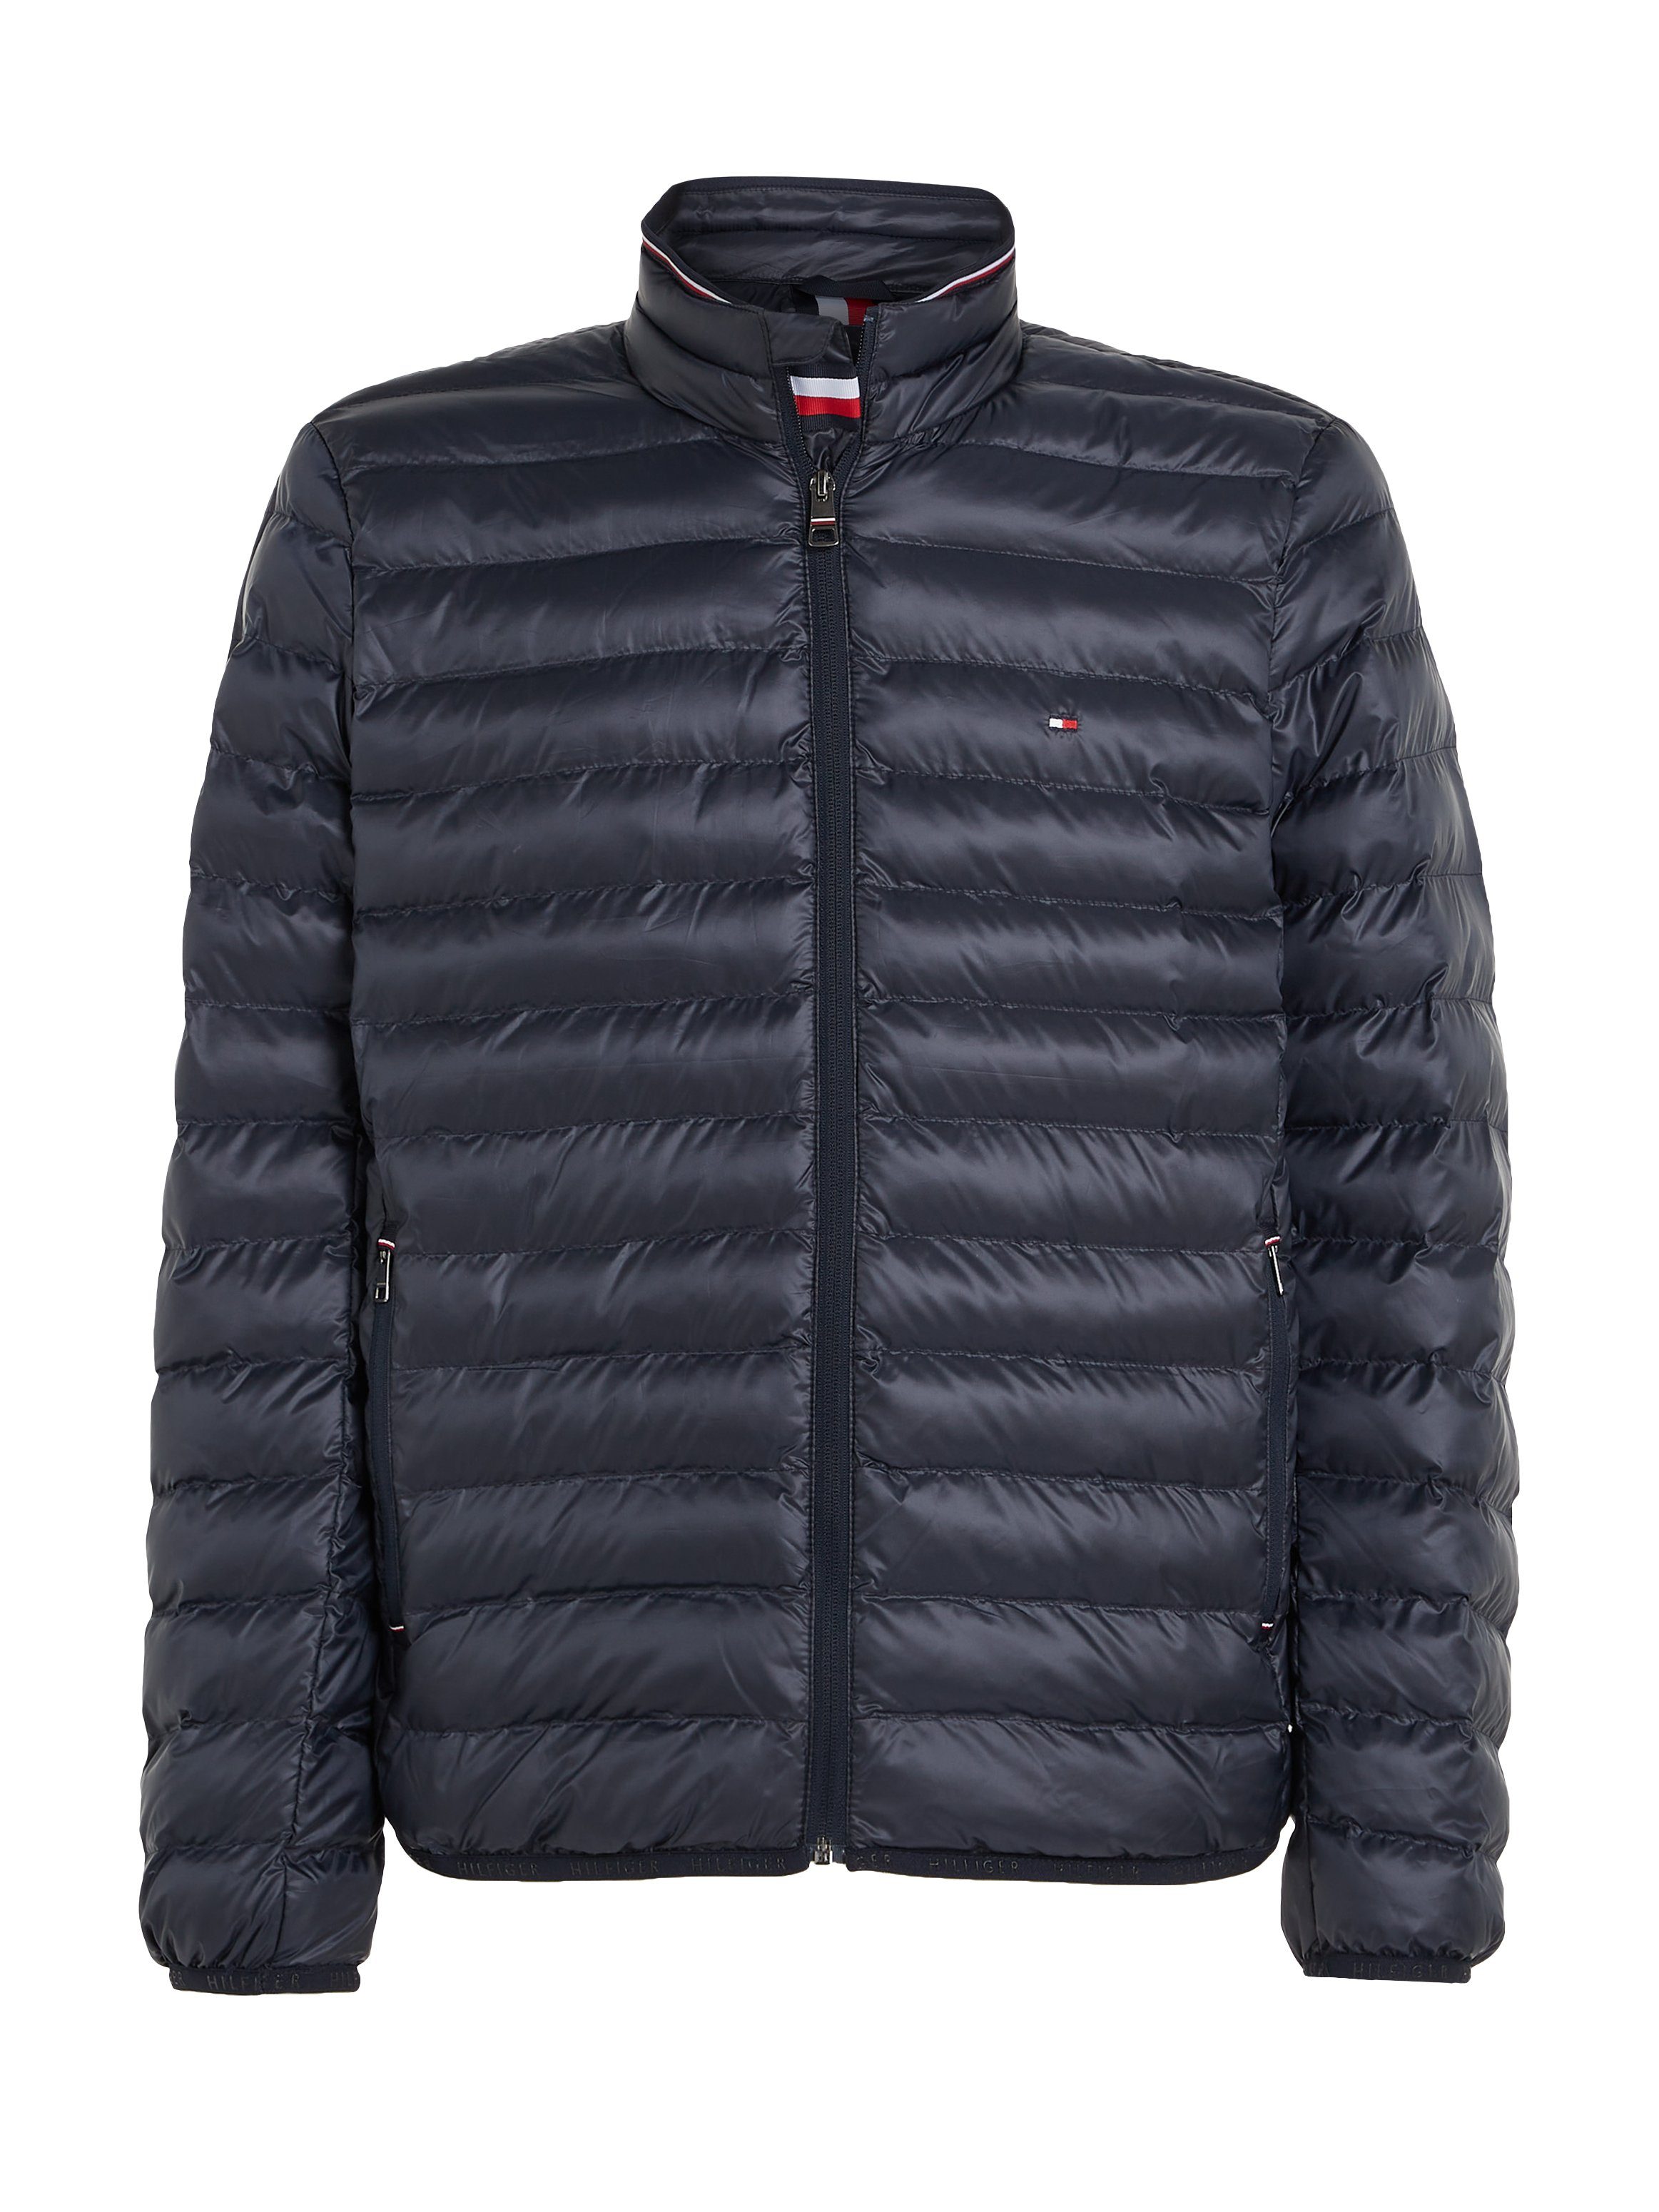 Tommy JACKET sky CORE RECYCLED Steppjacke PACKABLE desert Hilfiger